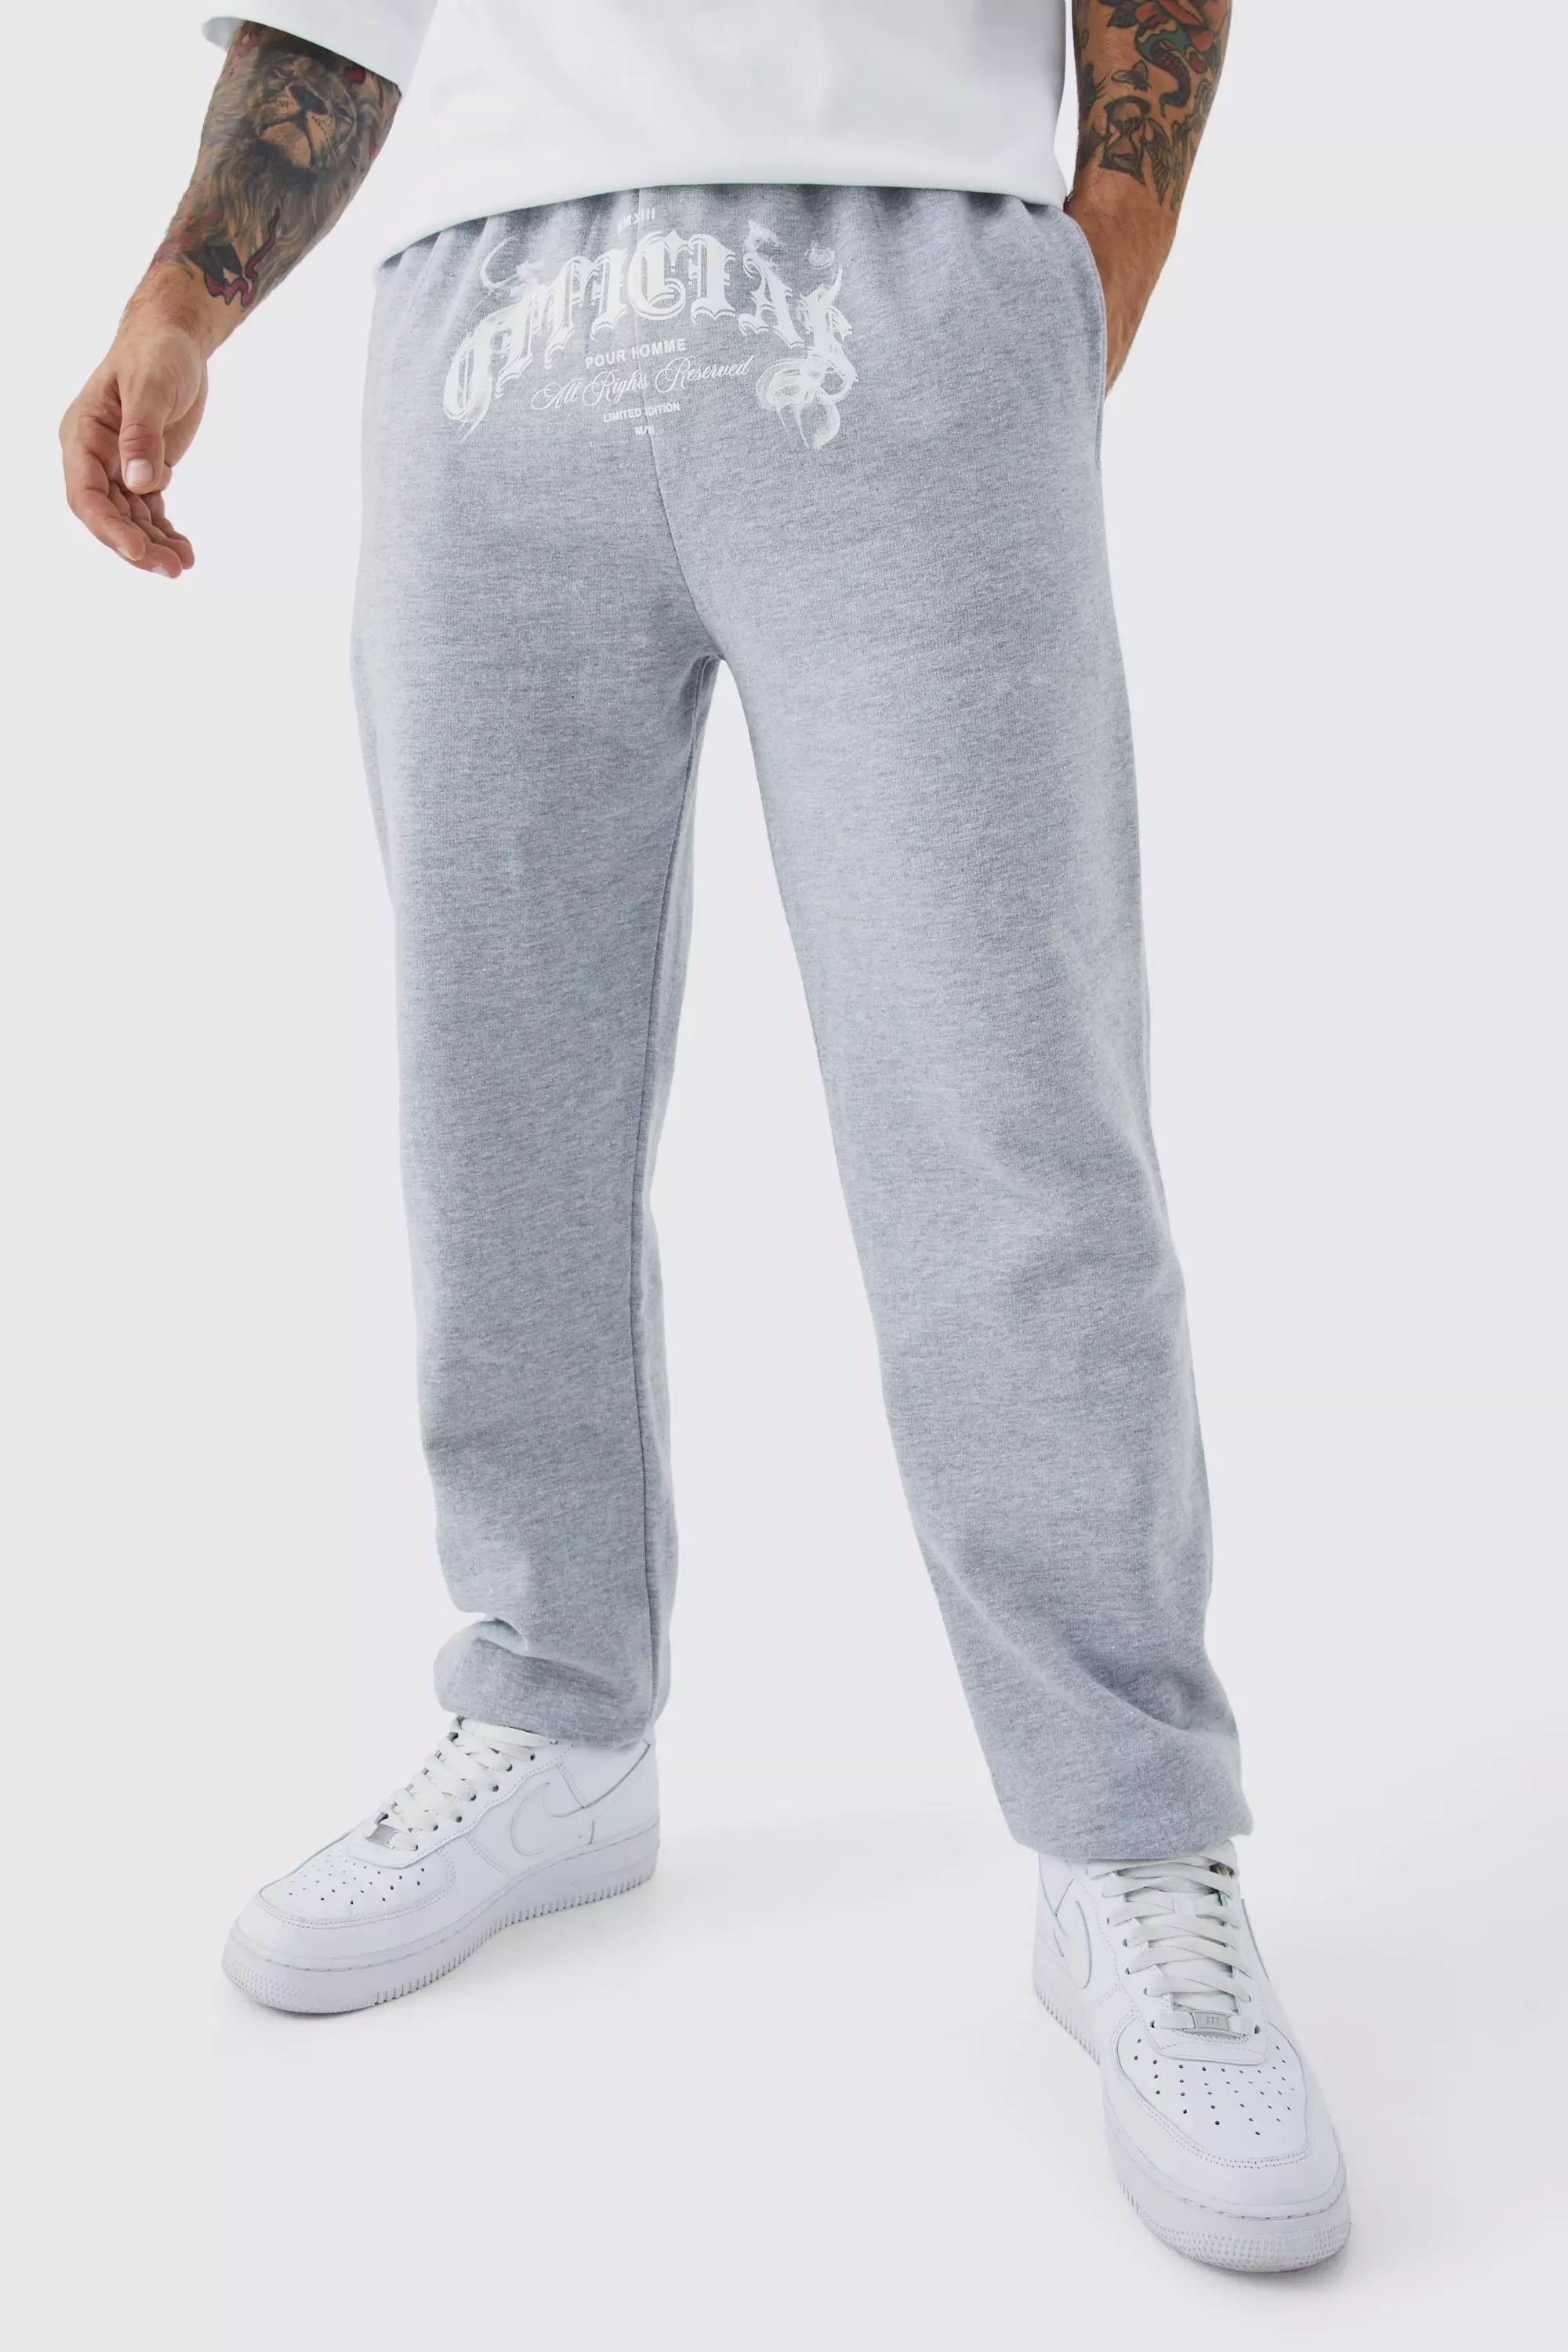 Grey Official Smoke Graphic Sweatpants